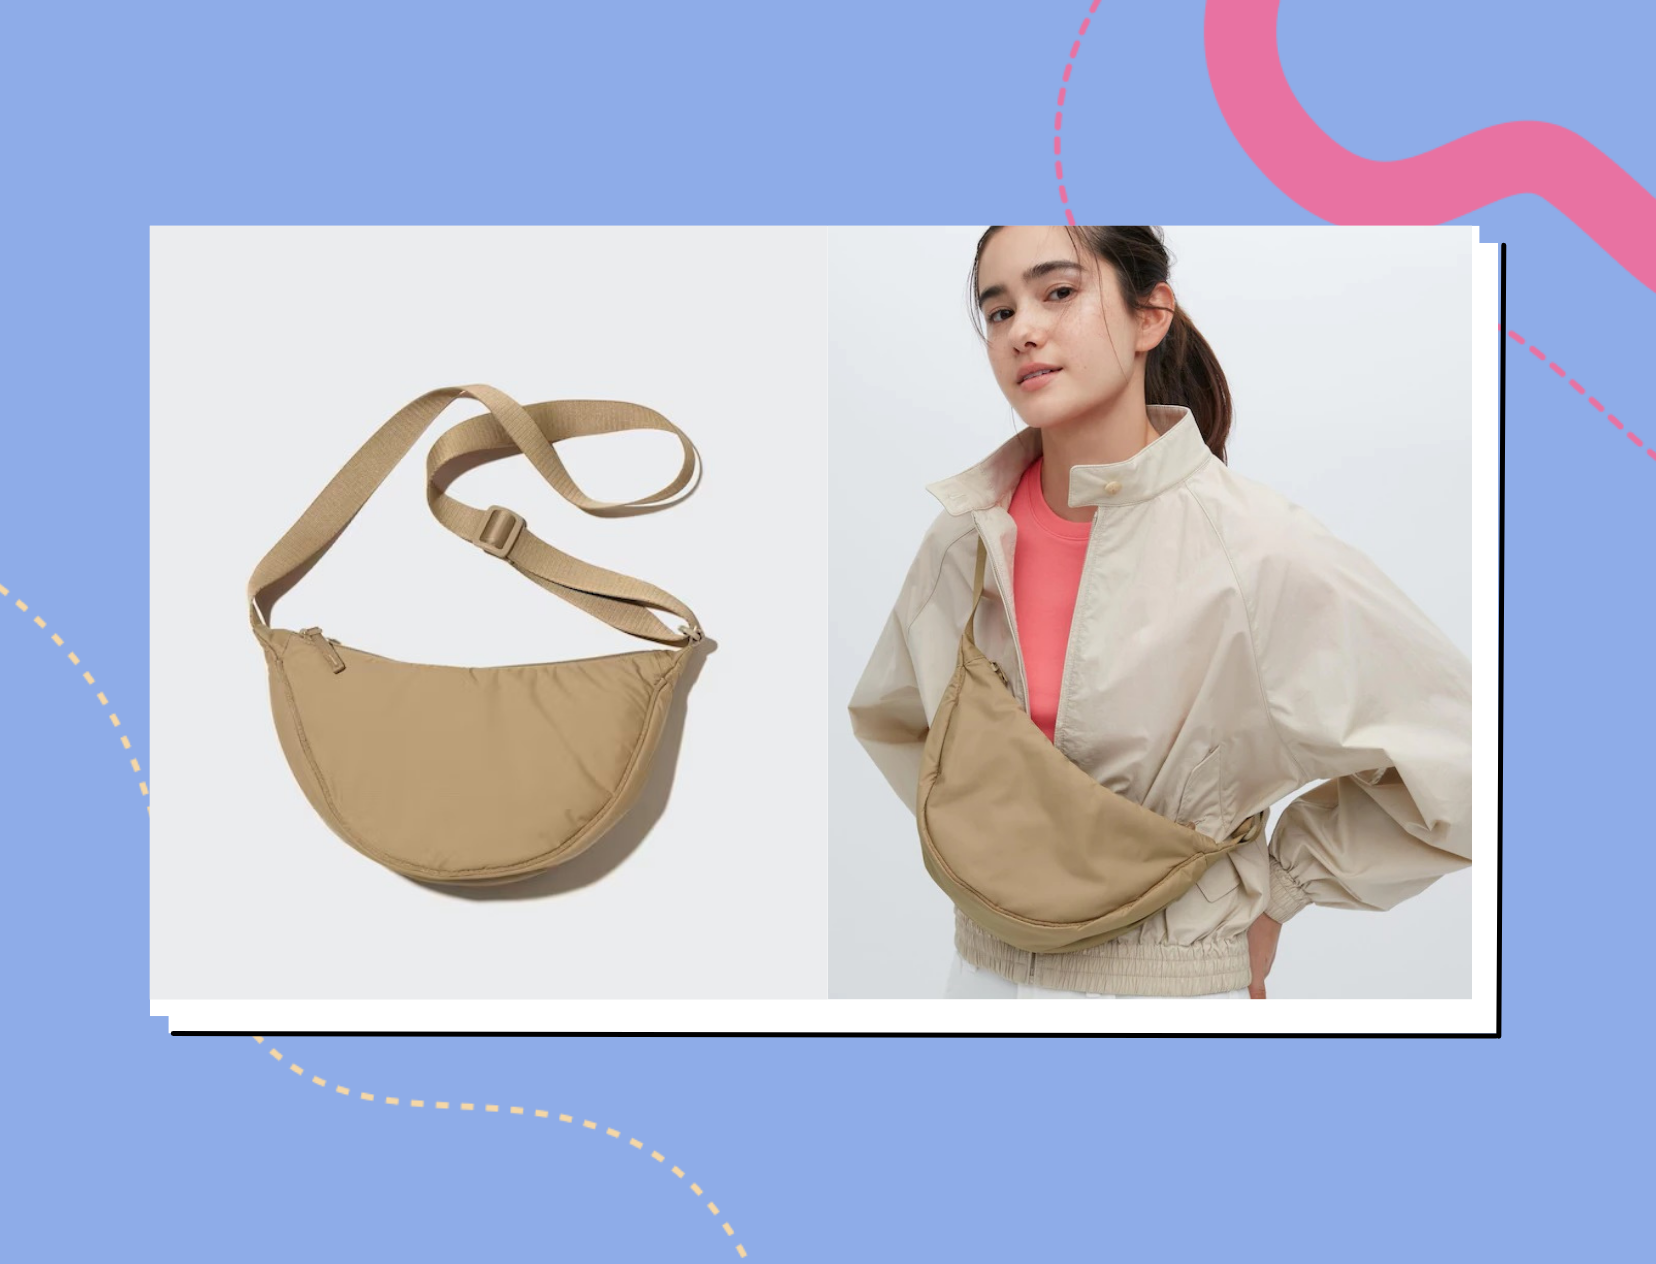 Uniqlo dropped spring colors of its viral shoulder bag